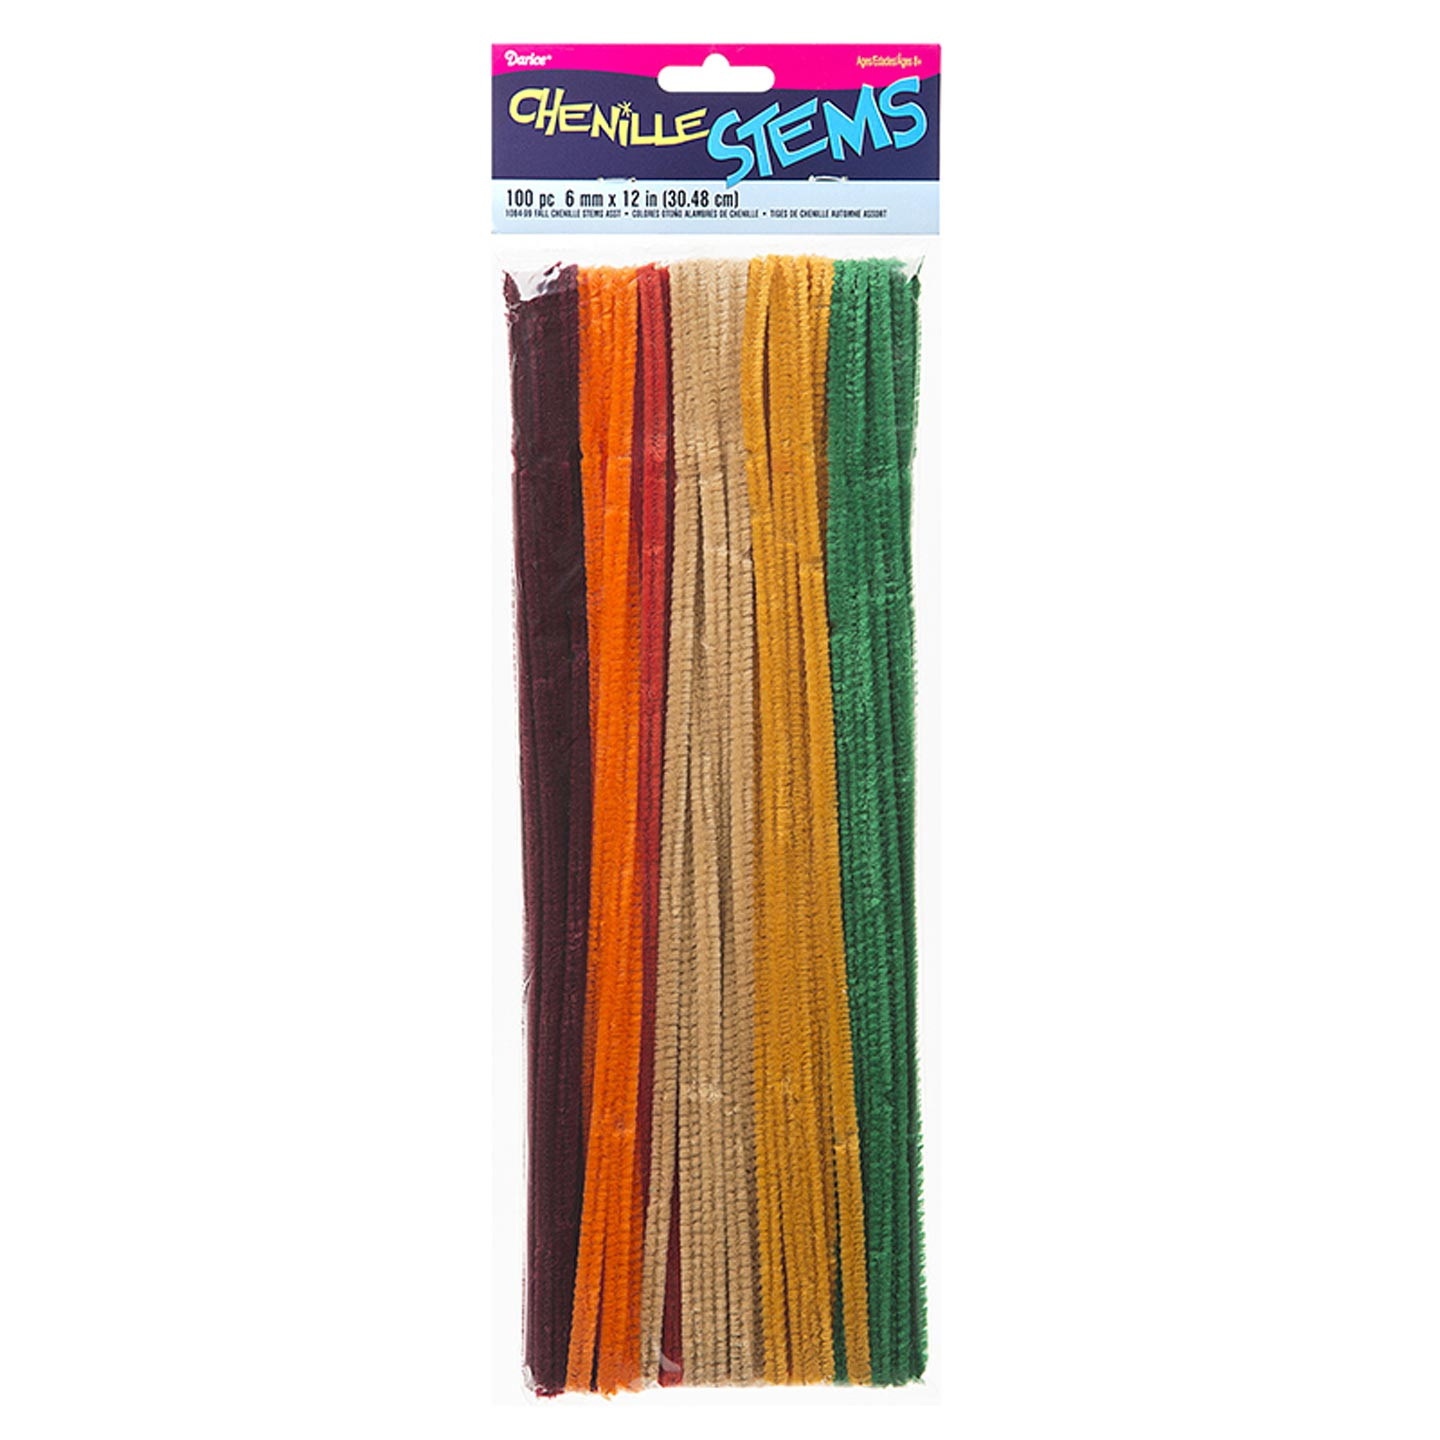 6mm Gold Tinsel Pipe Cleaners 12 Inches 25 Pieces